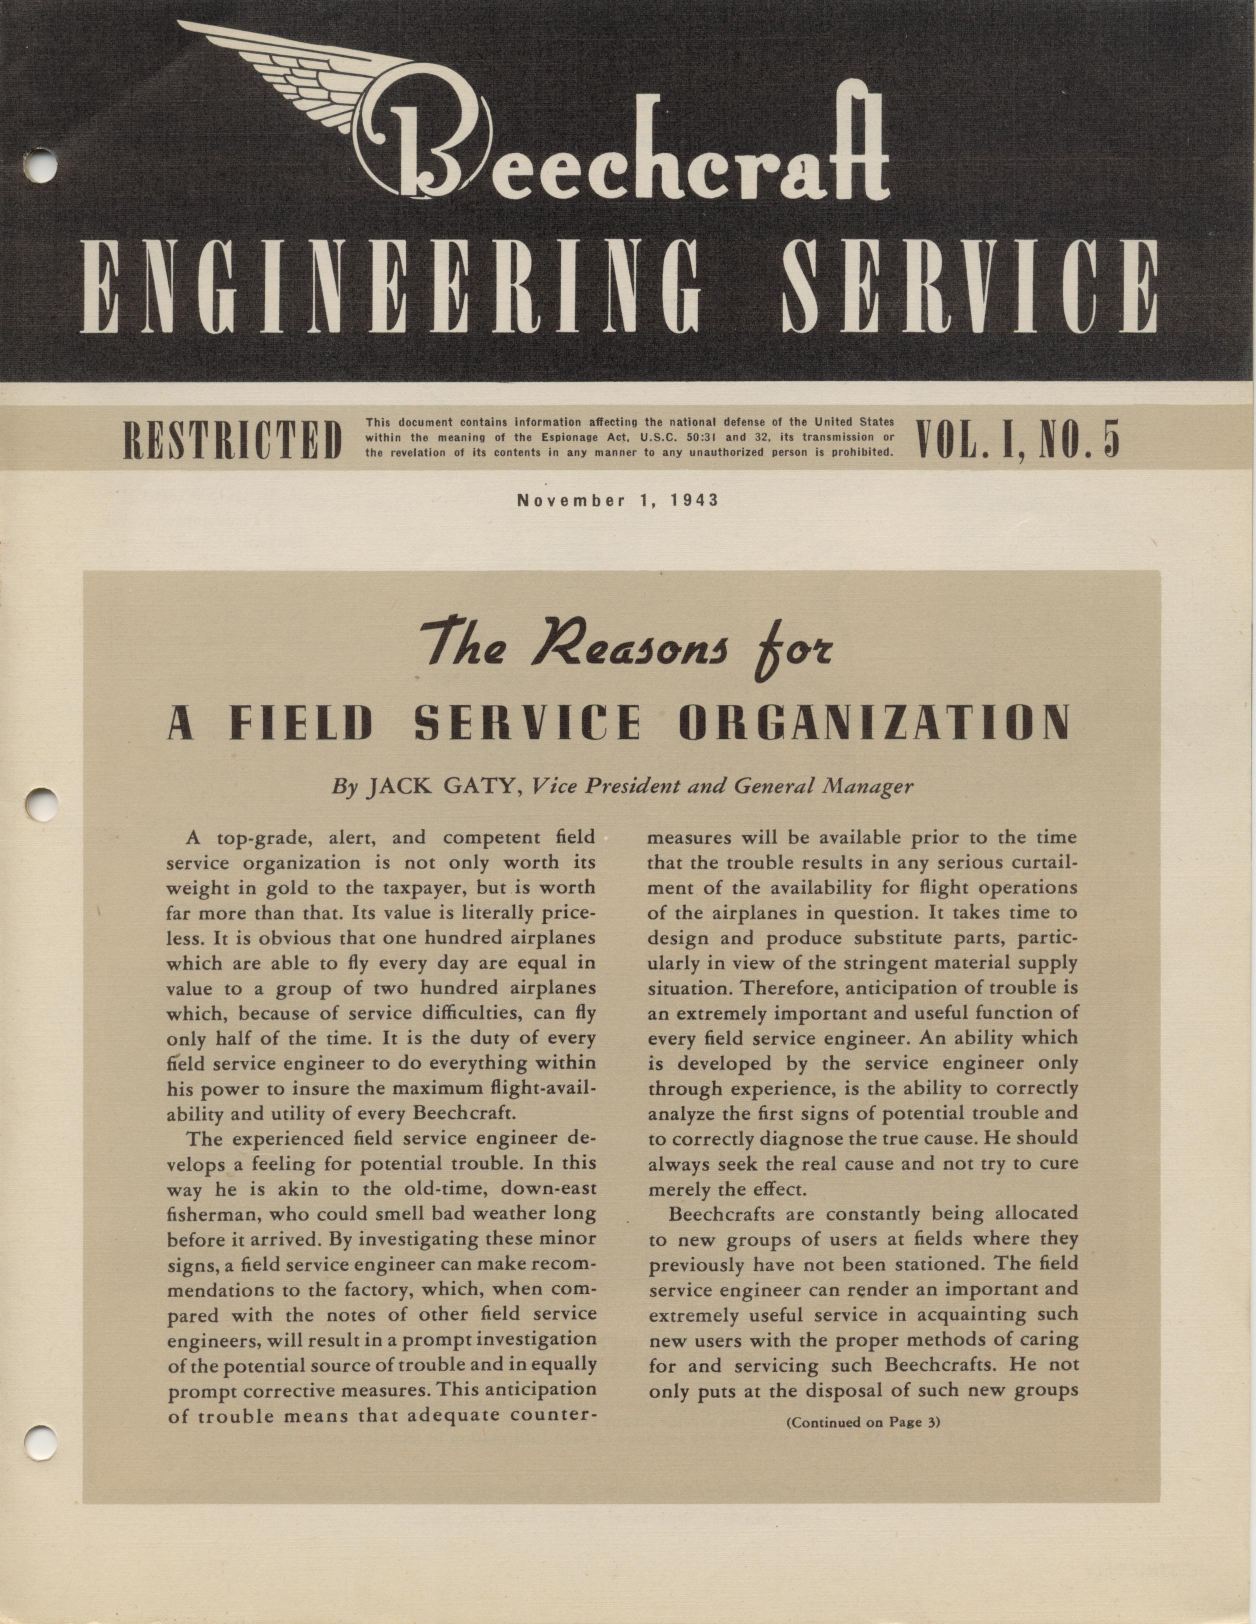 Sample page 1 from AirCorps Library document: Vol. I, No. 5 - Beechcraft Engineering Service